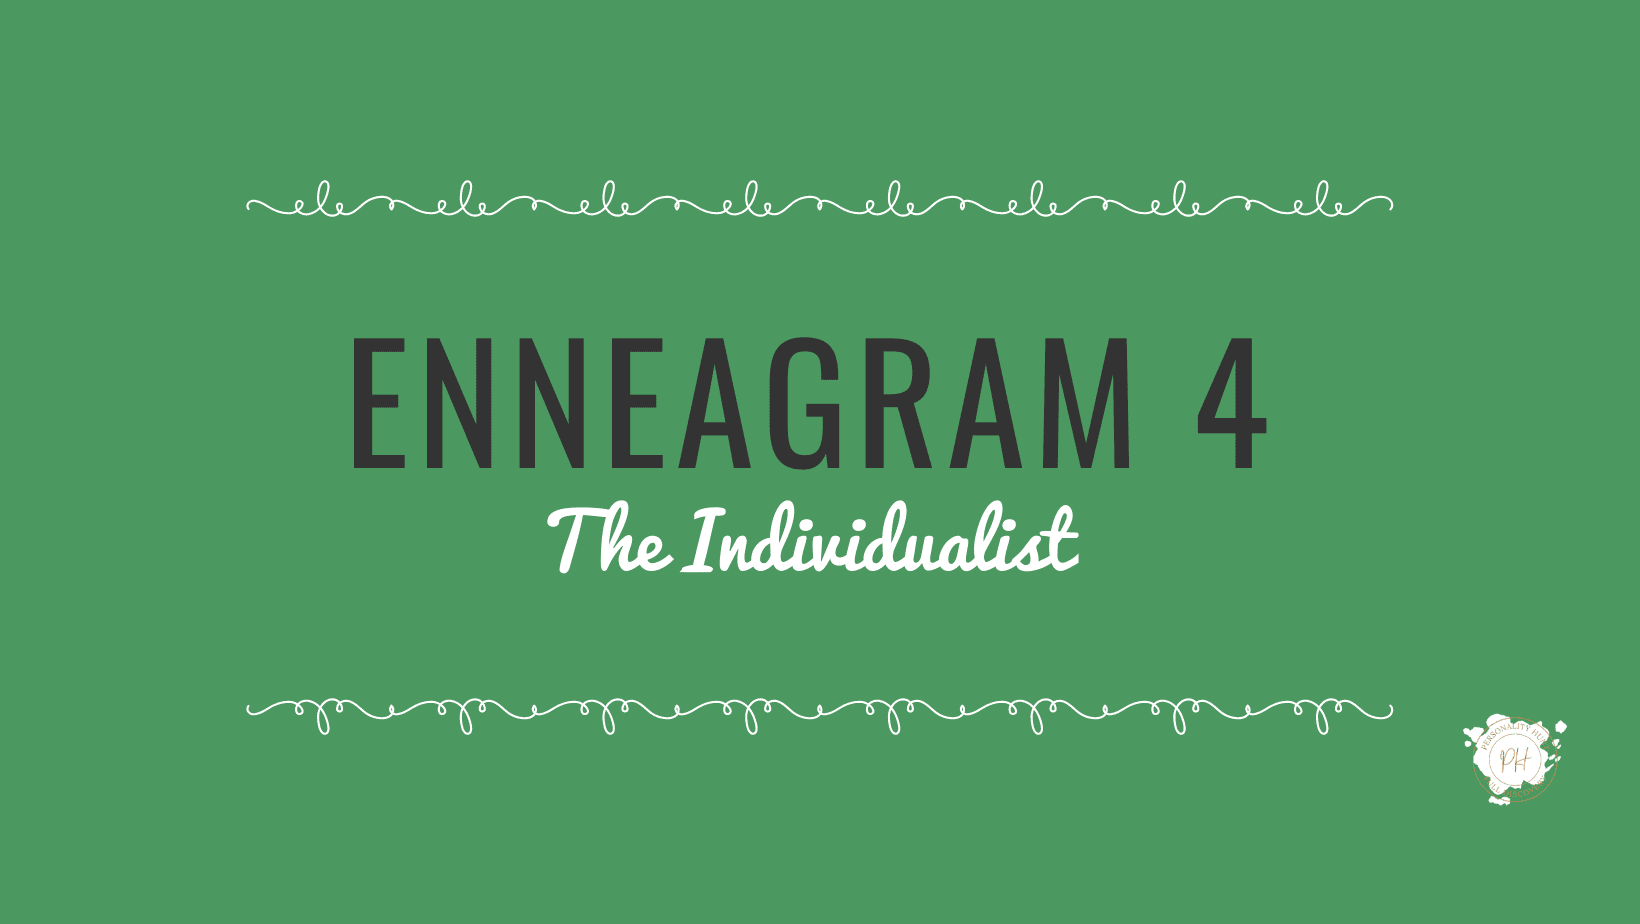 Enneagram Type 4- The Individualist